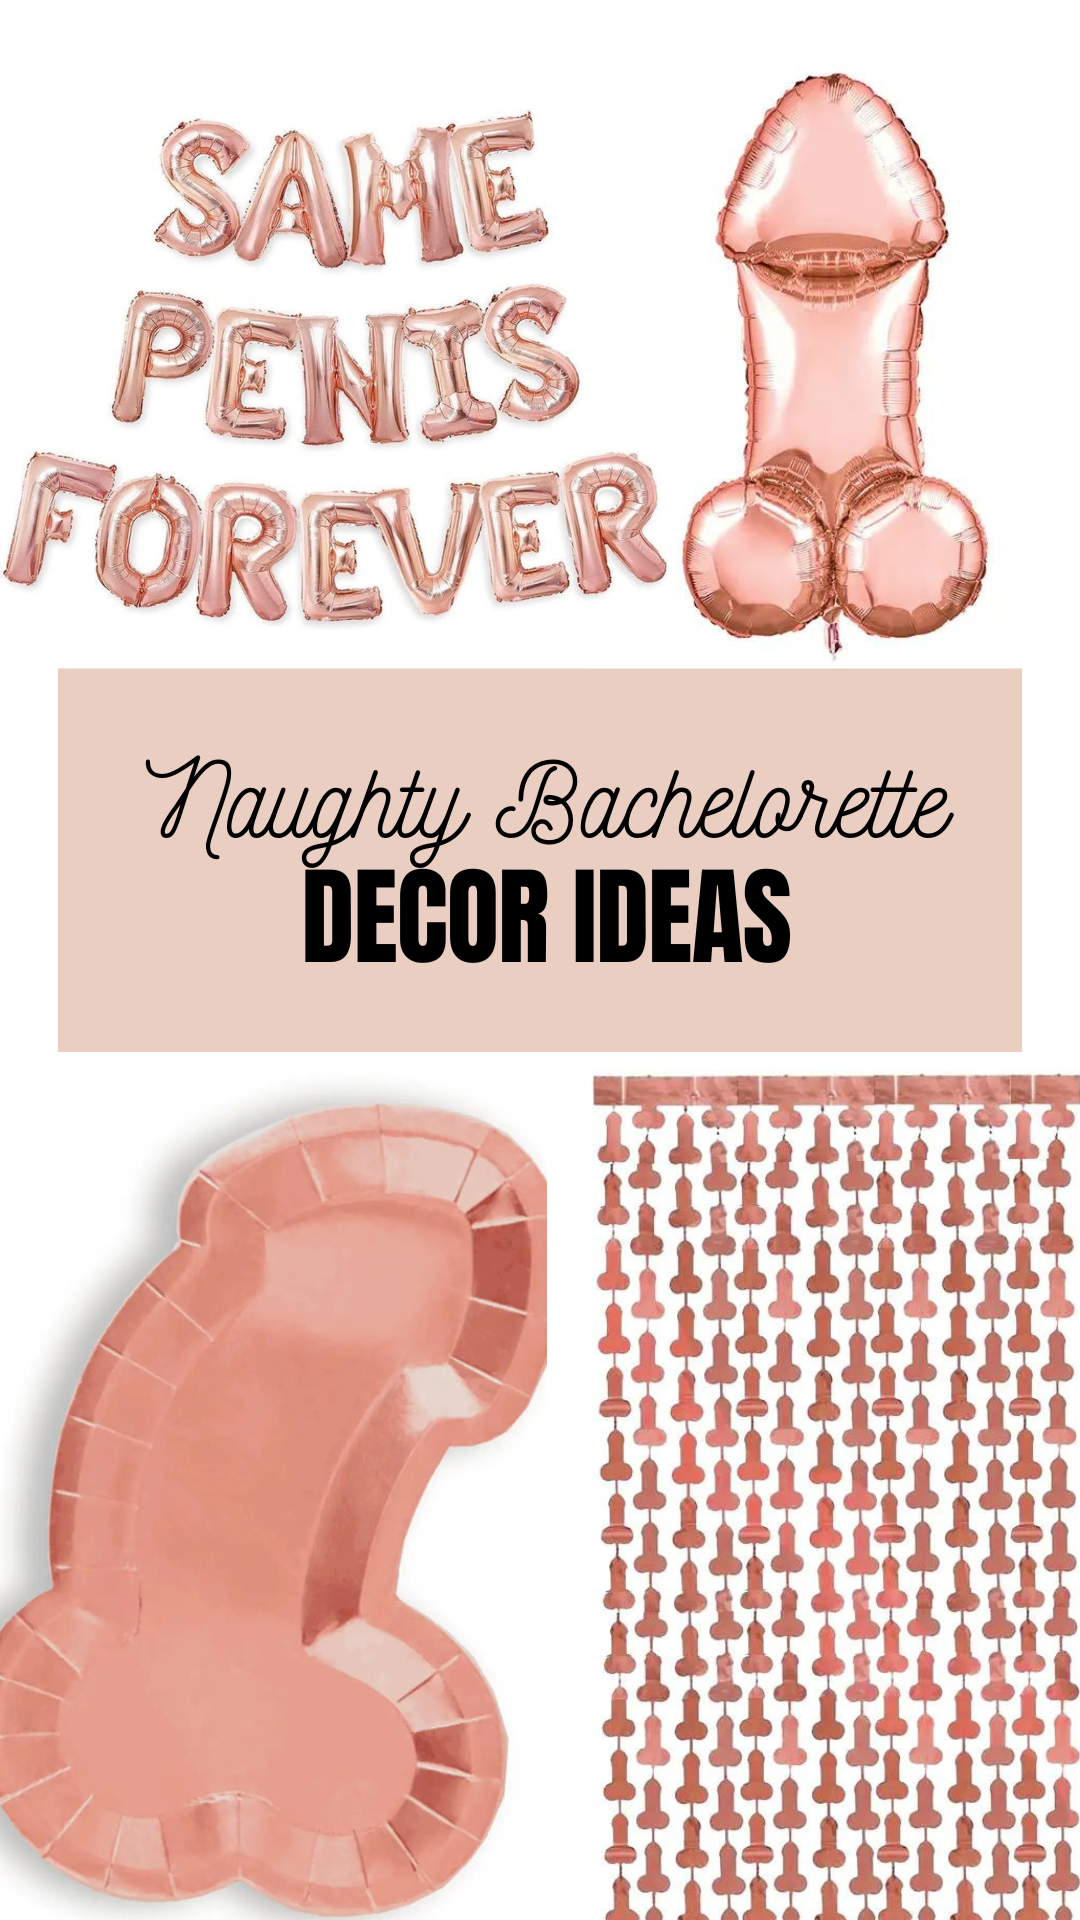 Naughty Bachelorette Party Decorations